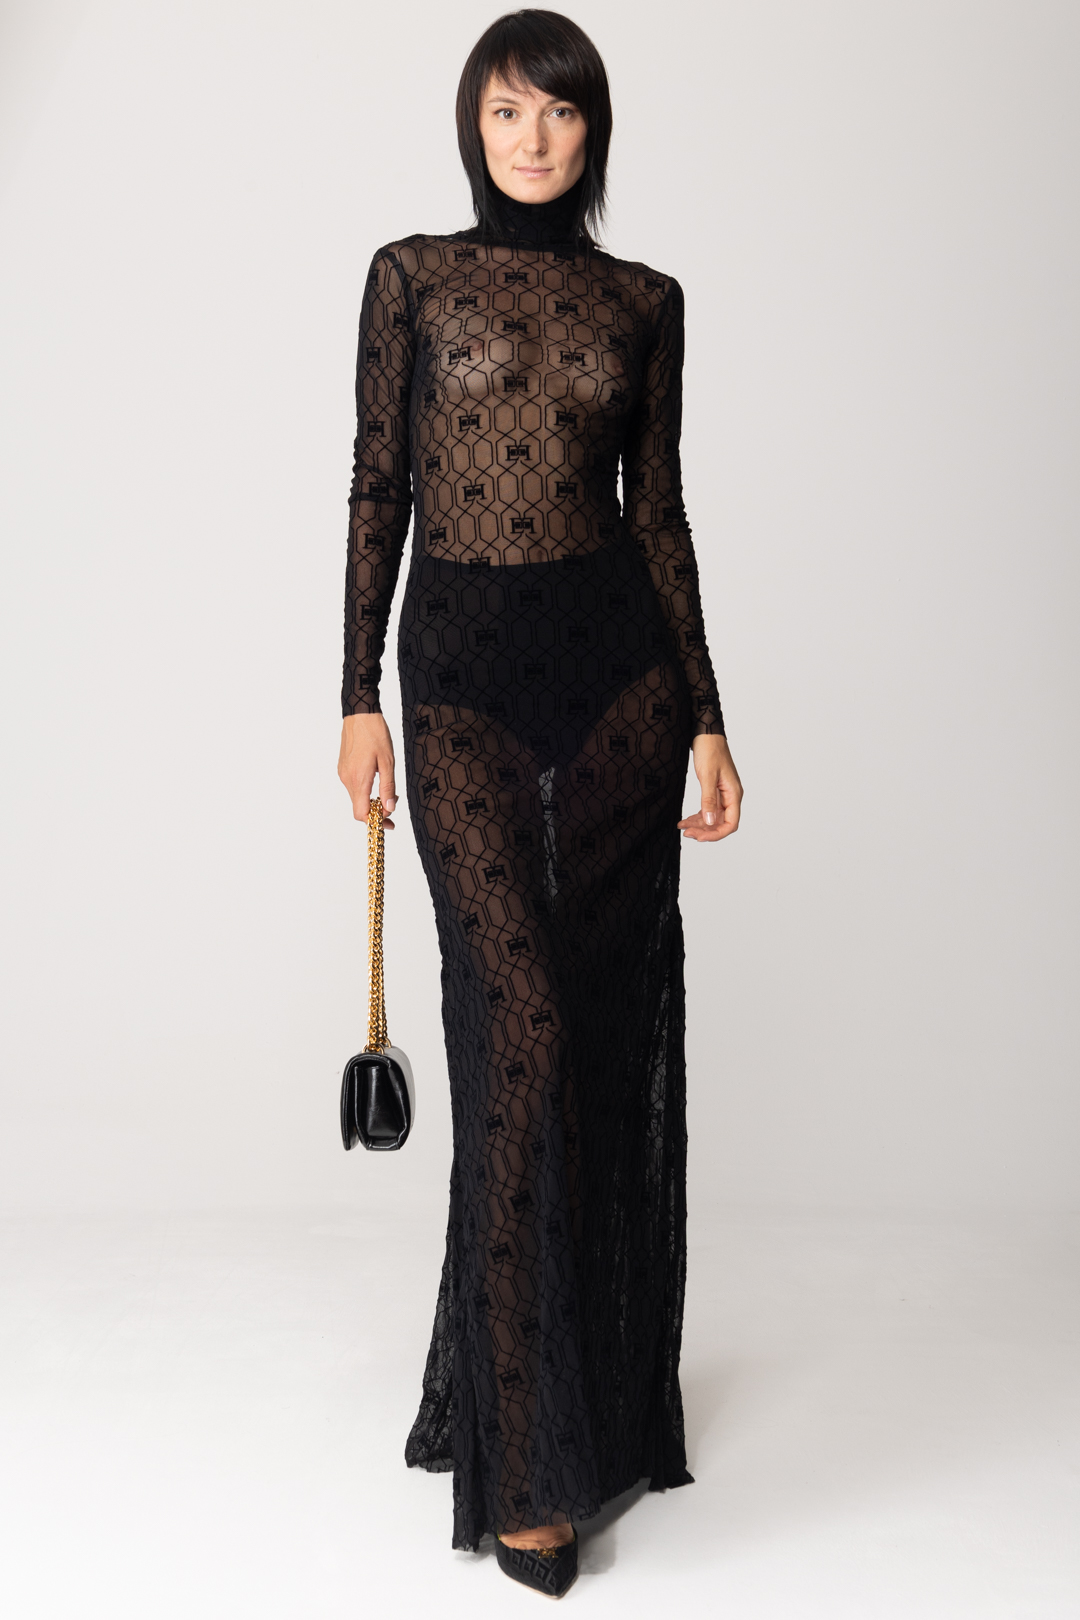 Preview: Elisabetta Franchi Red carpet tulle dress with flock print Nero